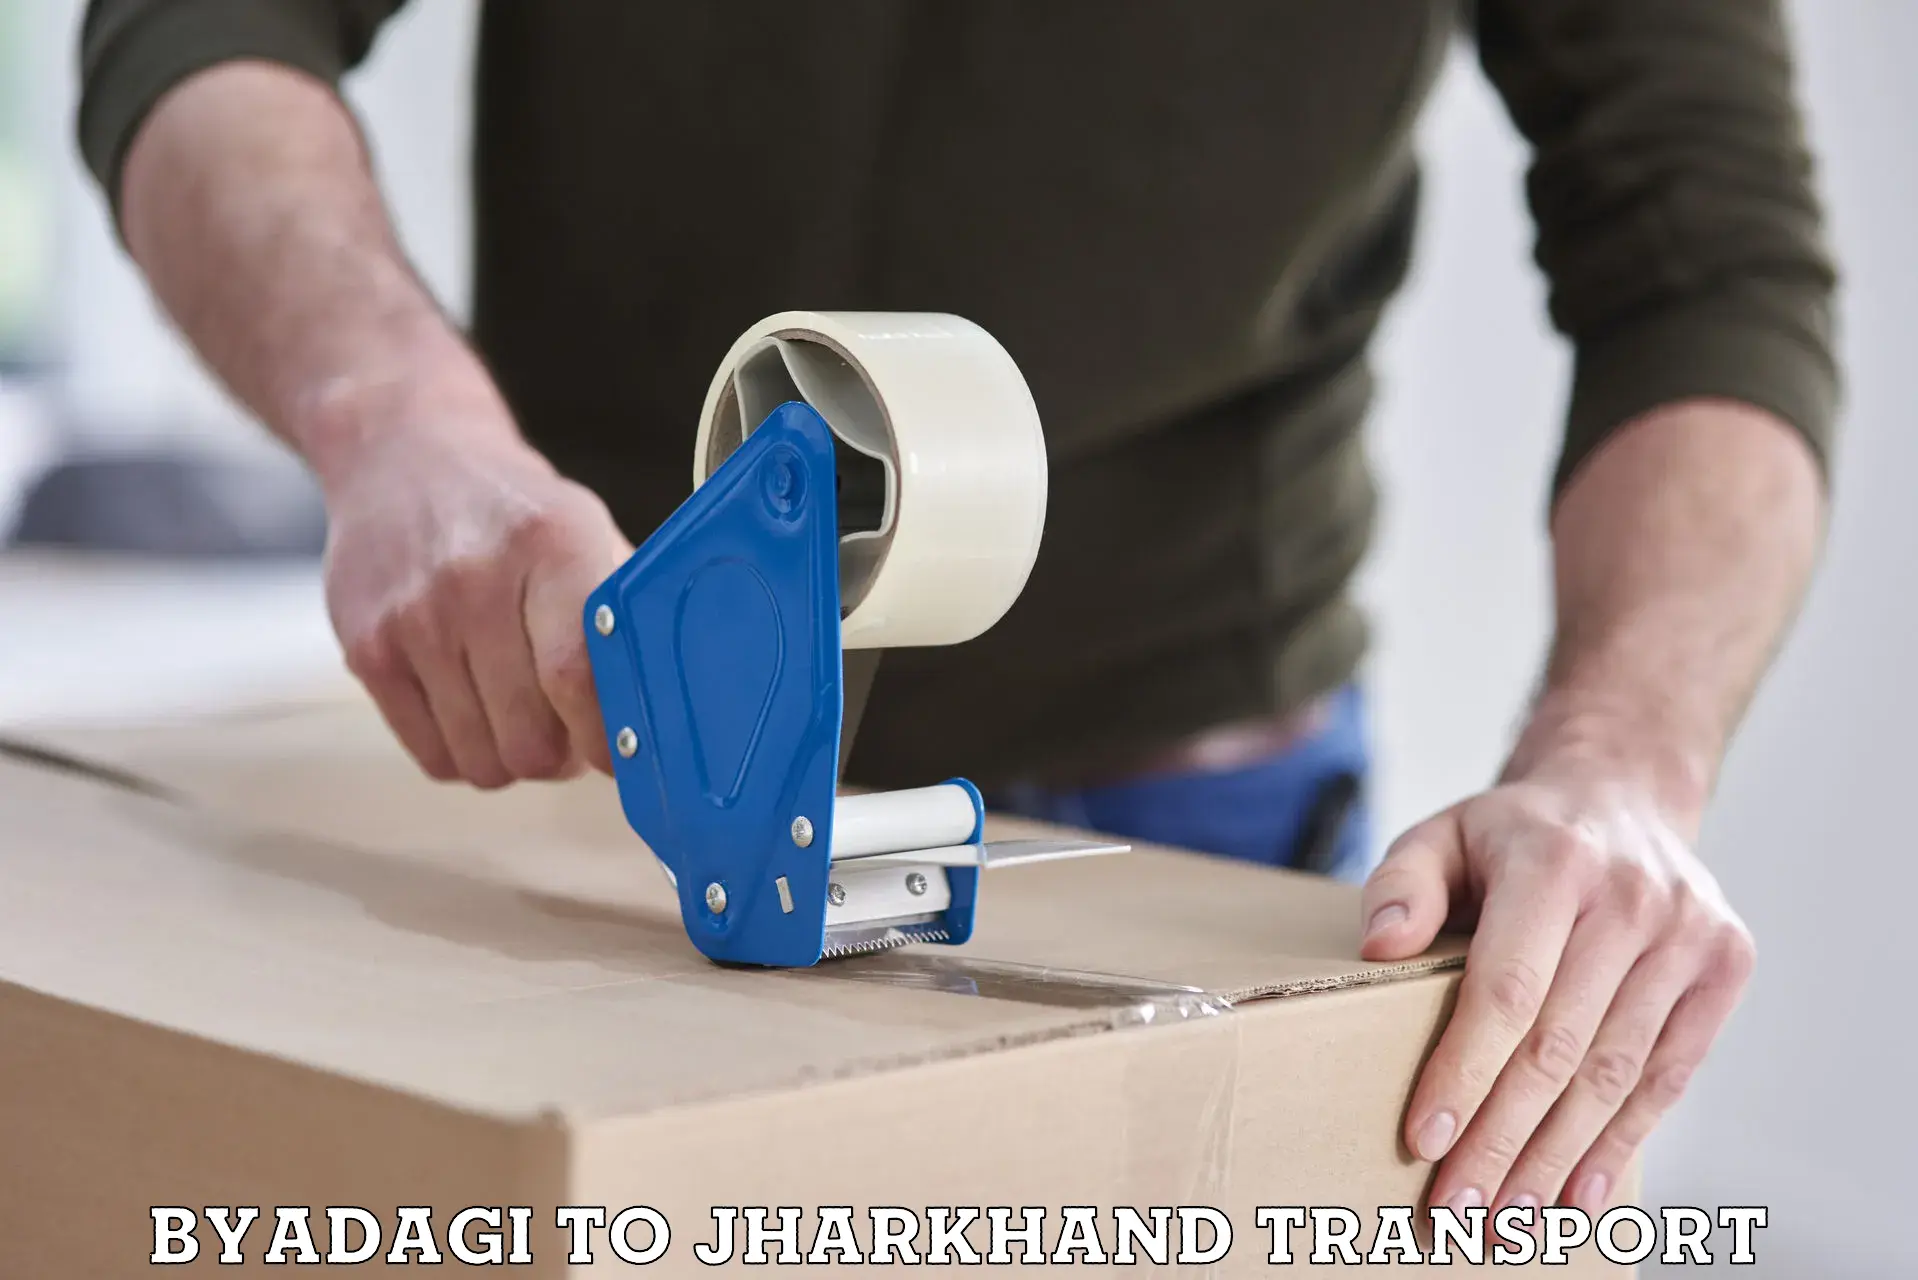 Truck transport companies in India in Byadagi to Dhanbad